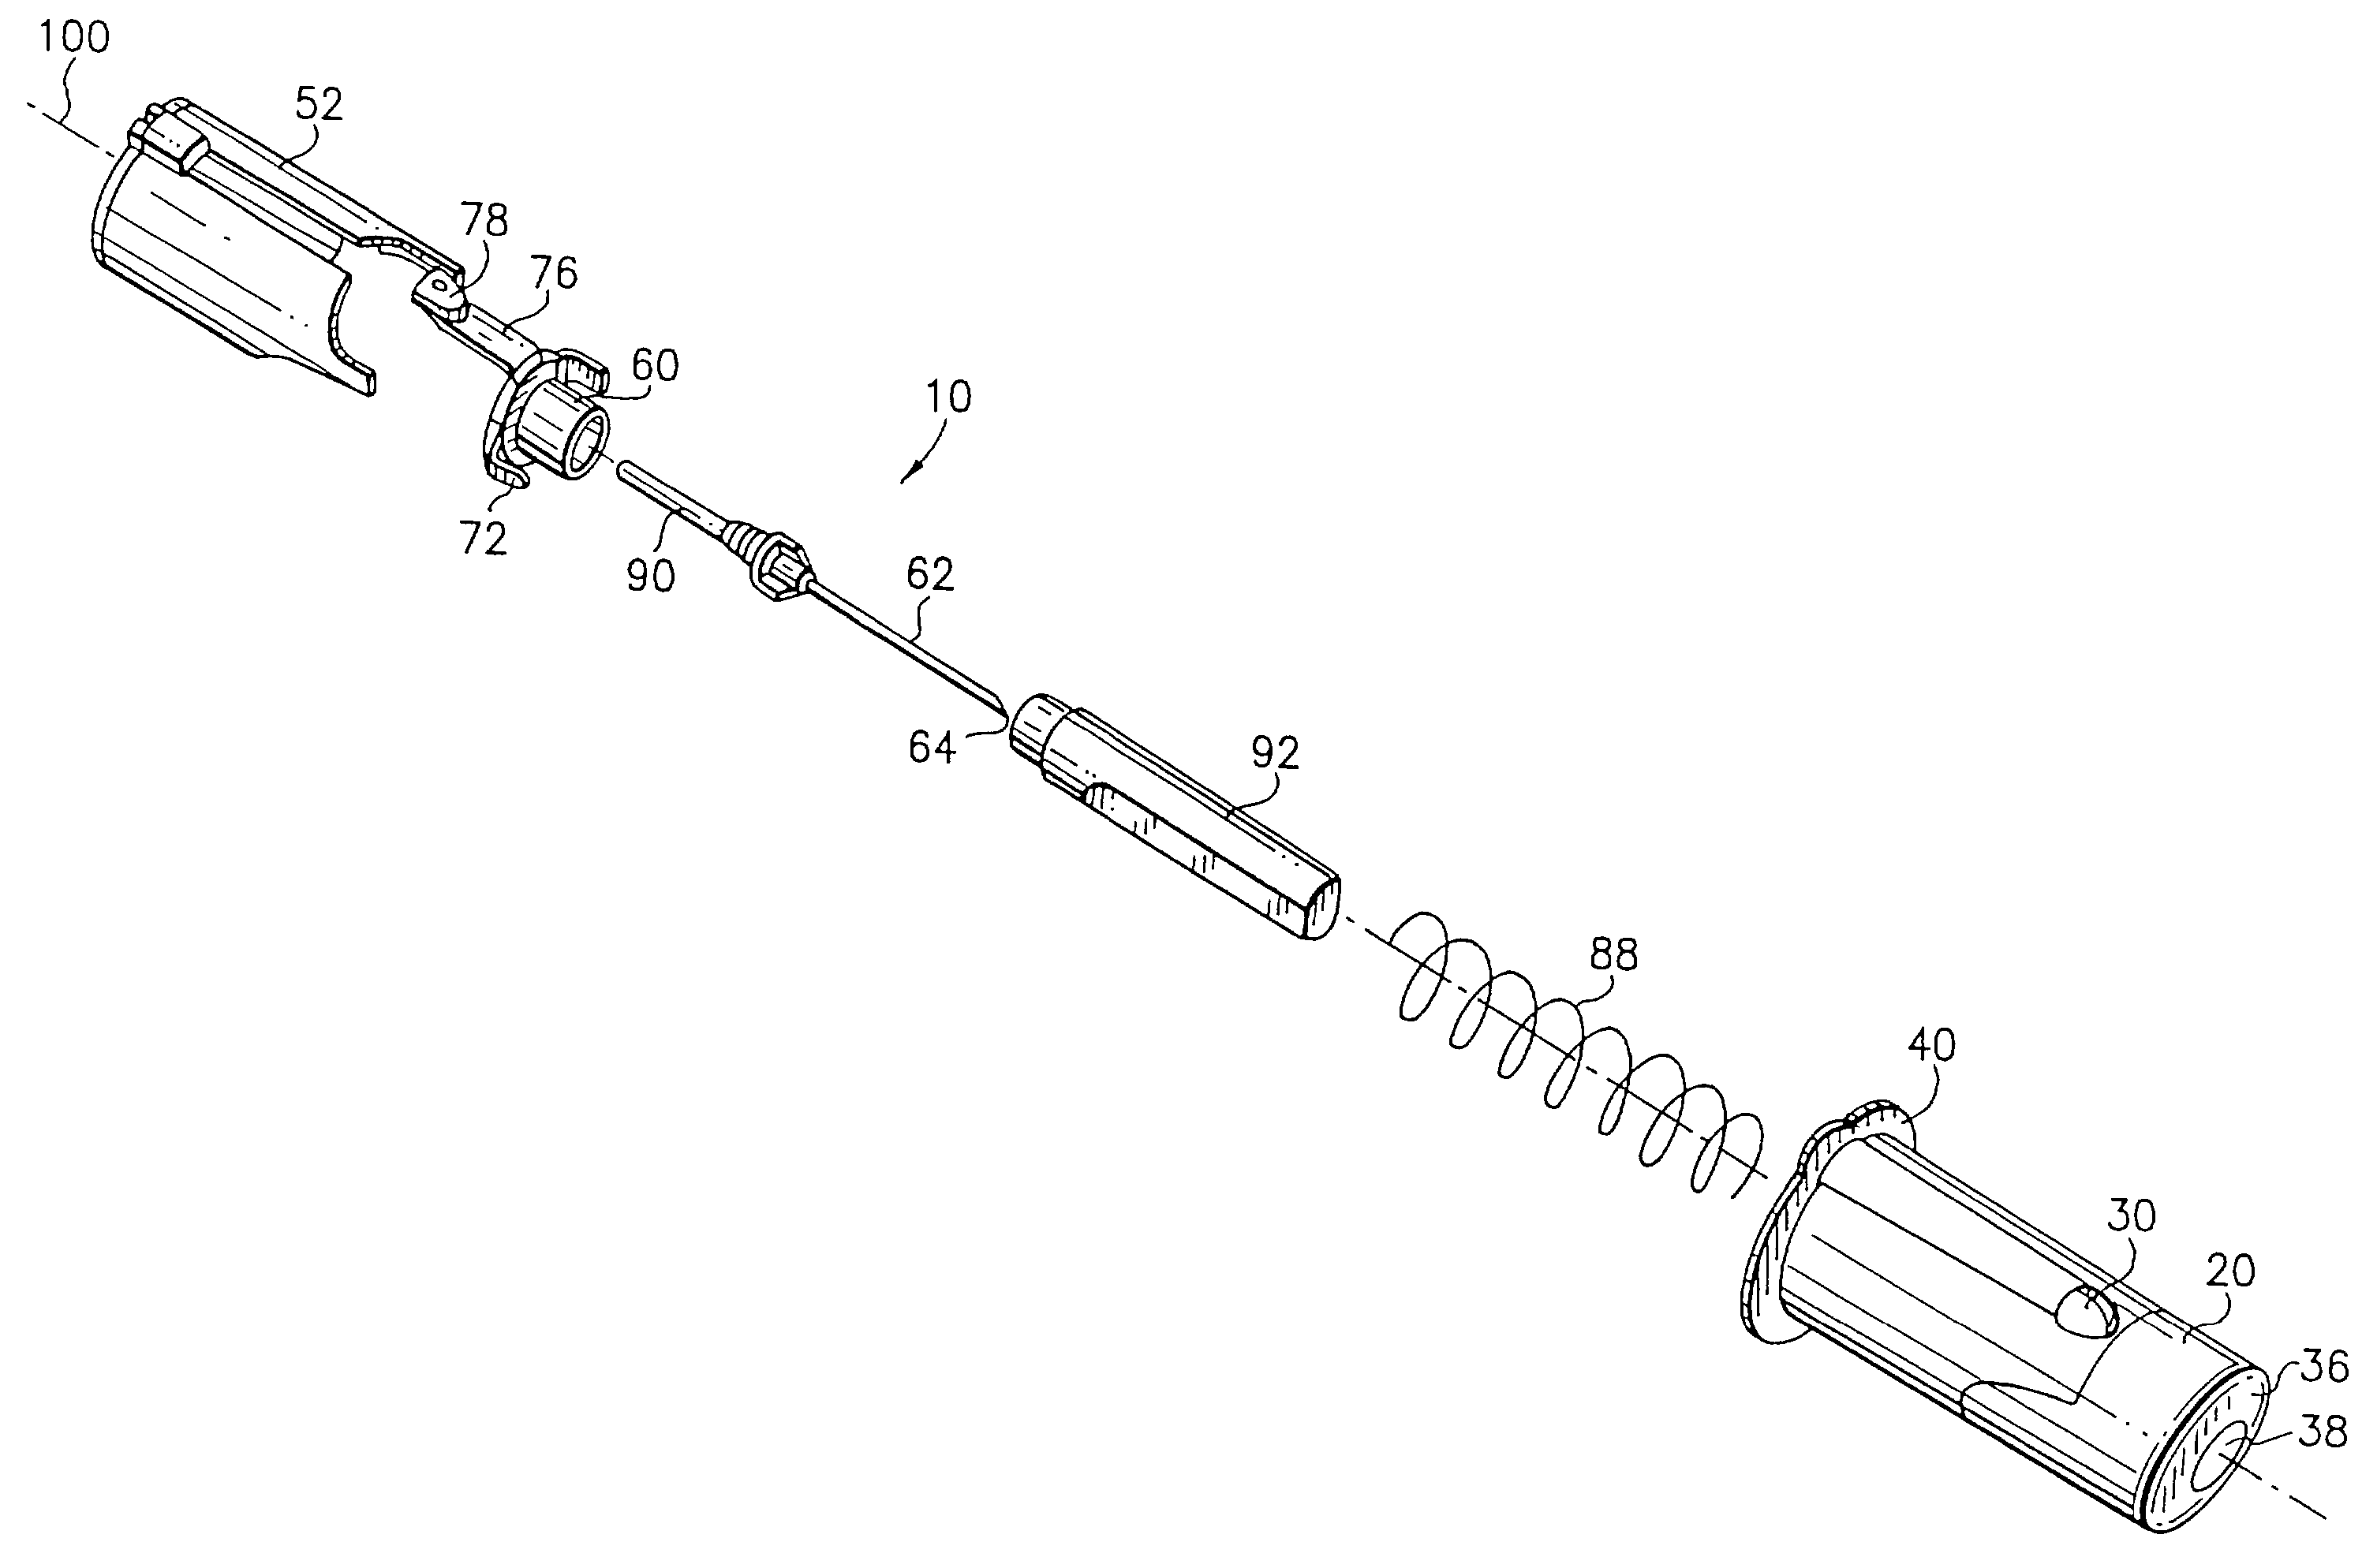 Retracting needle safety device